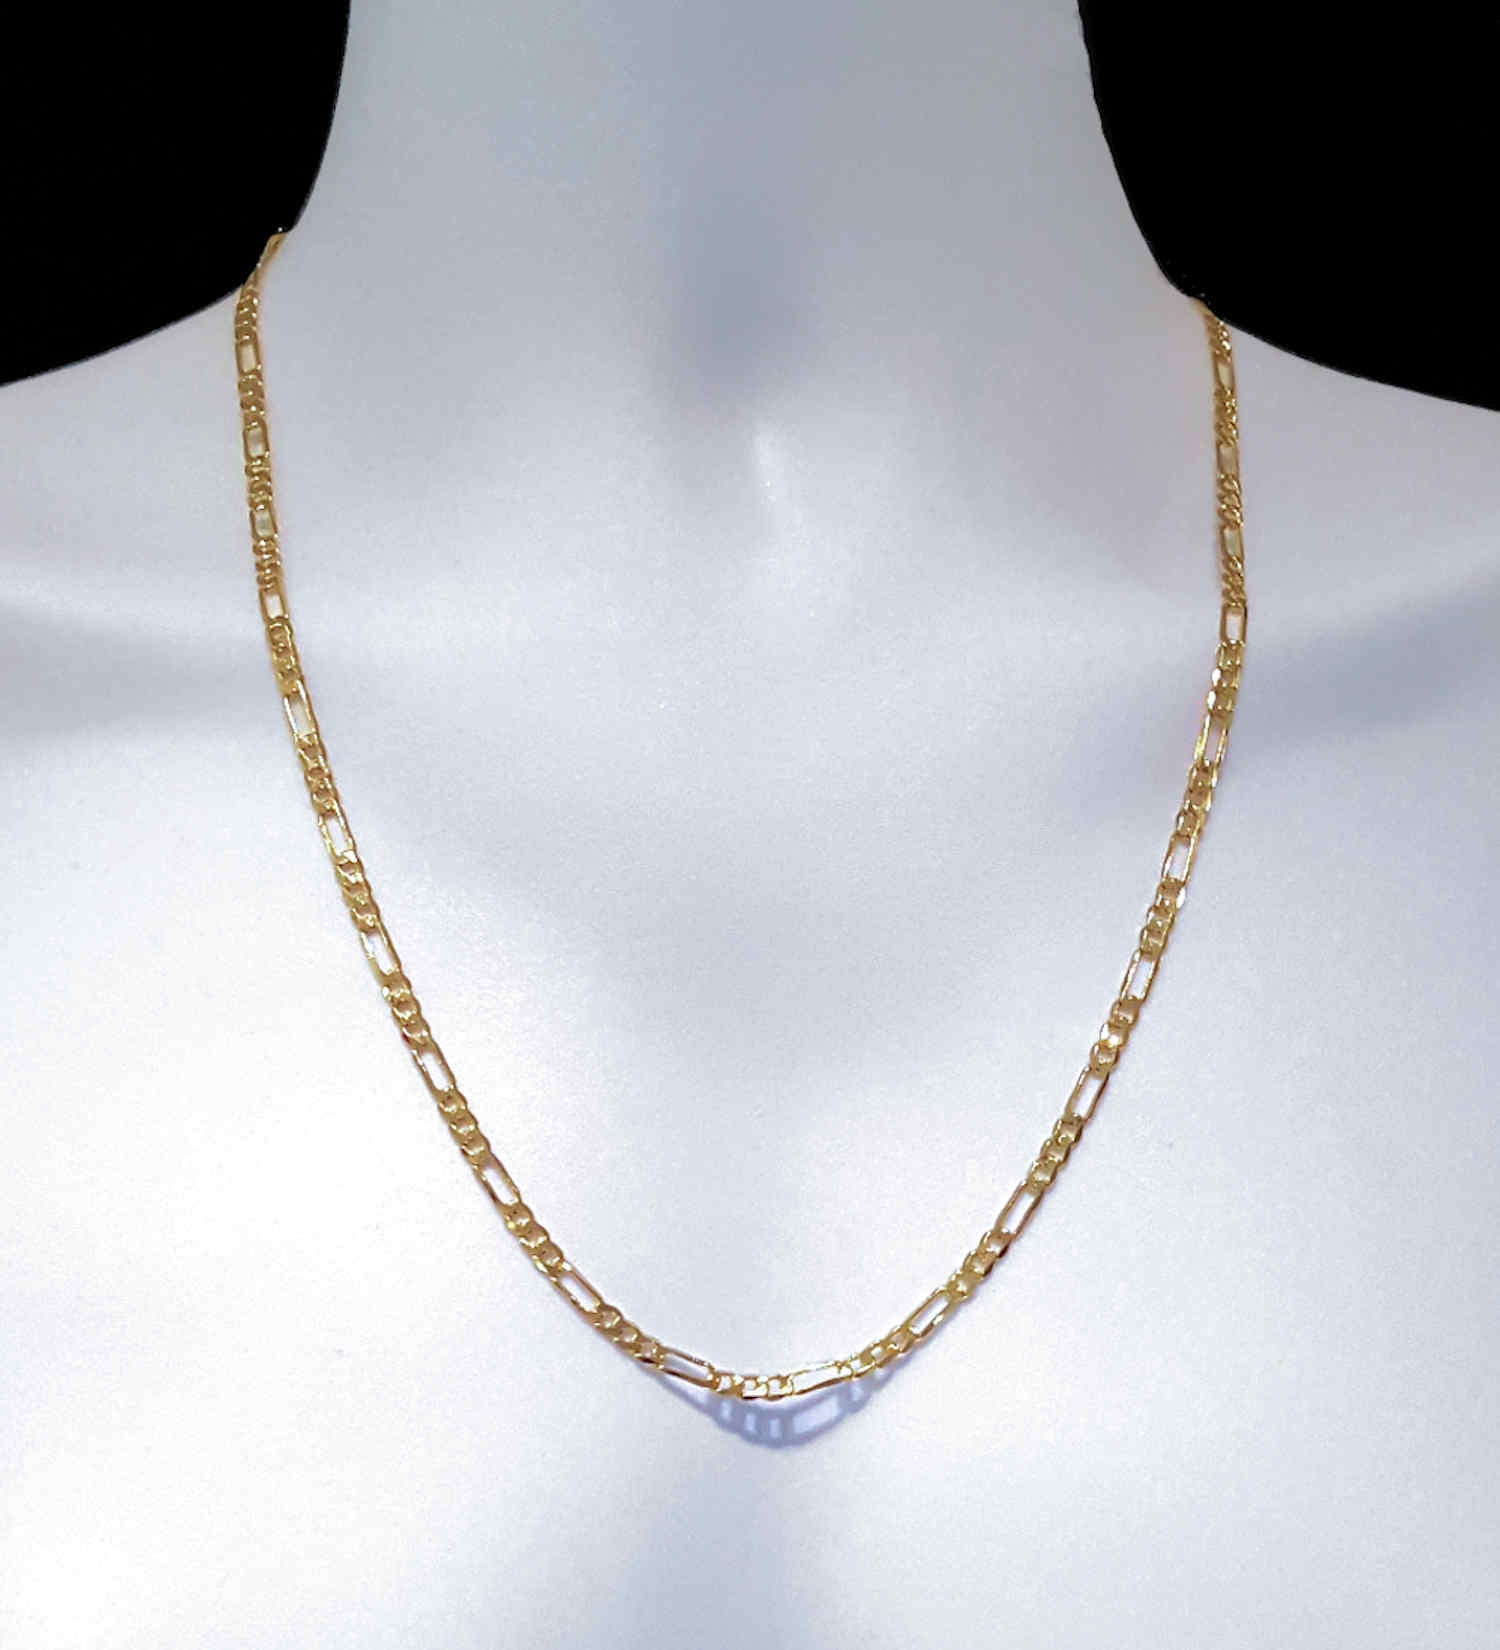 4mm Wide Figaro Style Gold Chain in Solid 14K Gold Yellow or White 14K White / 24